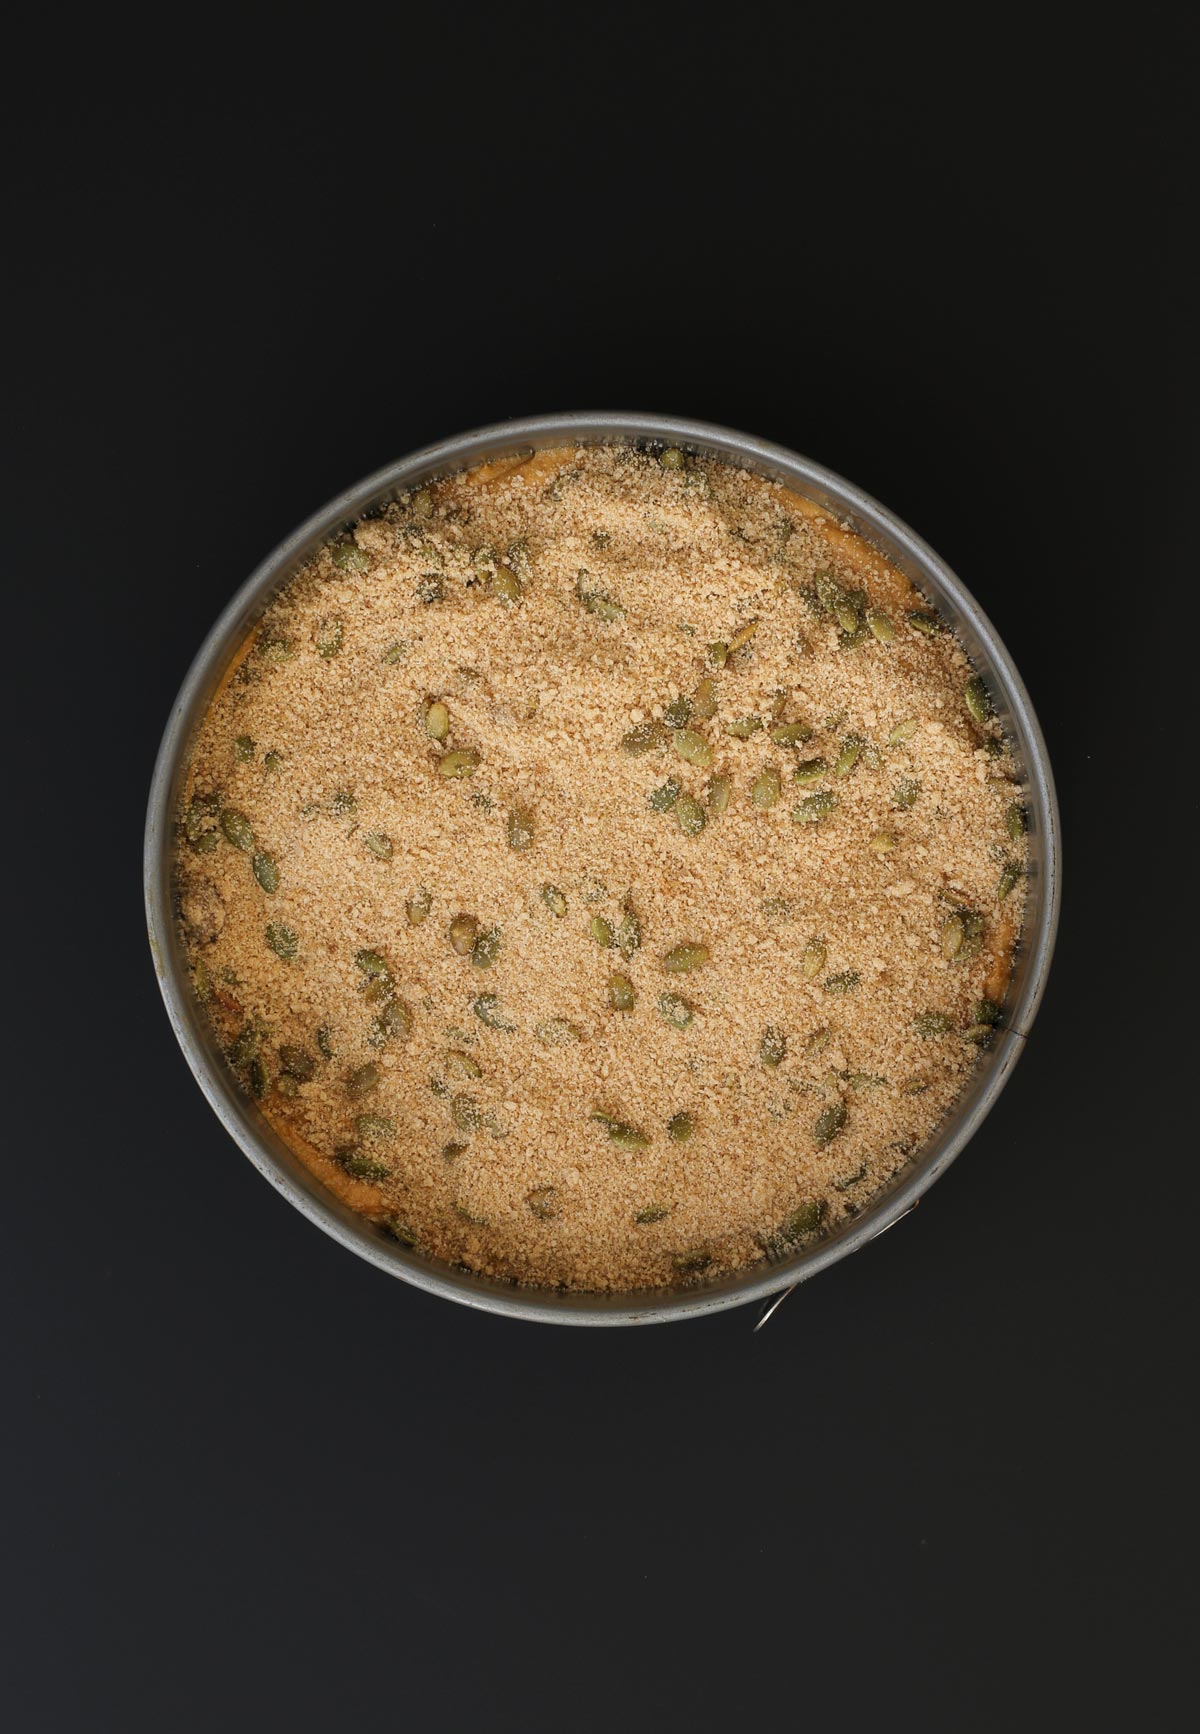 crumb mixture added atop the cake batter in the pan.